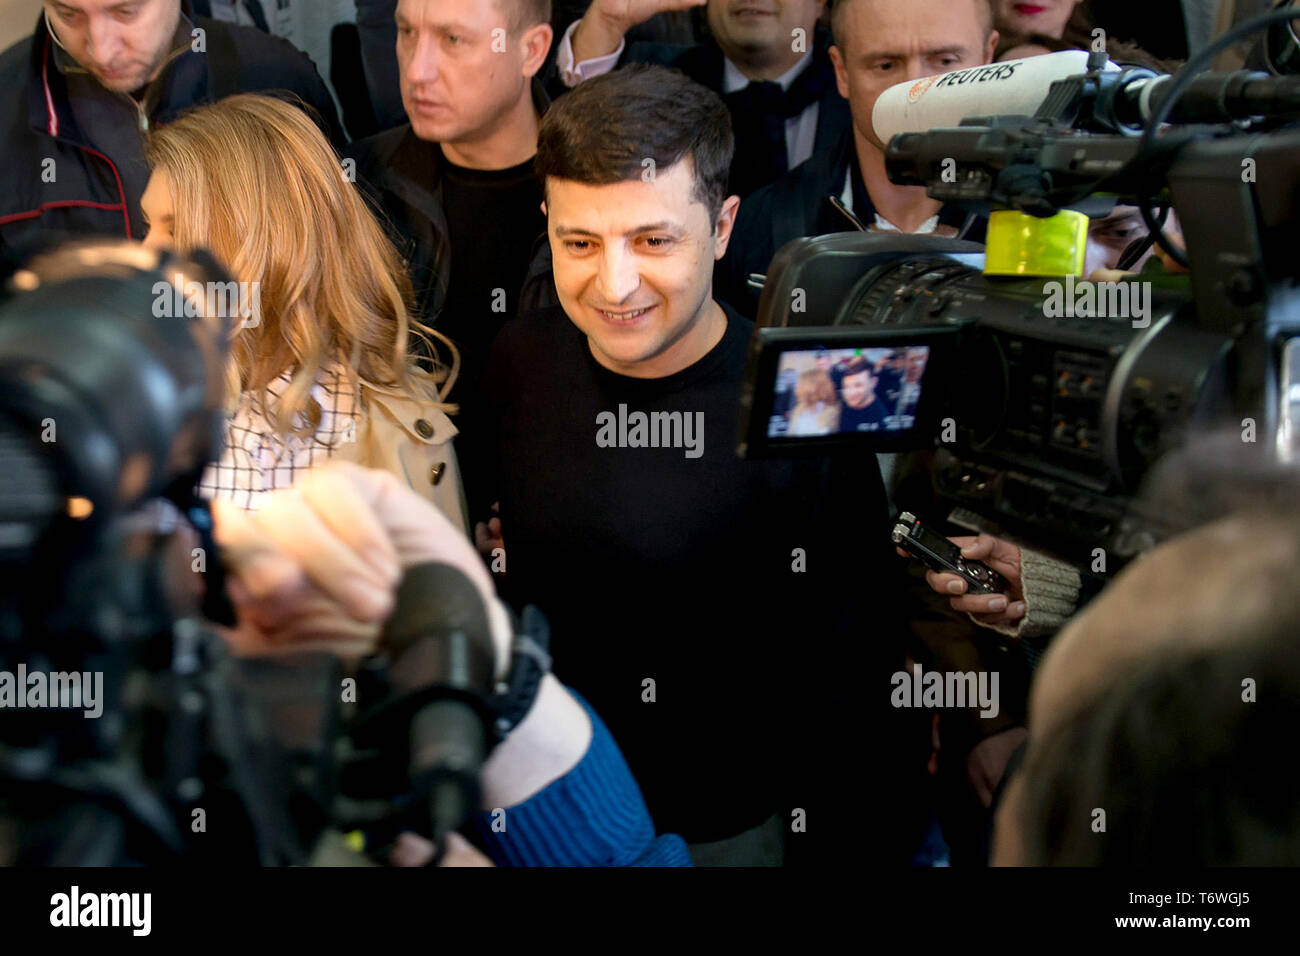 Ukrainian comic actor and presidential candidate Volodymyr Zelenskiy at a polling station to cast his ballot in Ukraine's presidential election in Kiev, Ukraine.  Featuring: Volodymyr Zelenskiy Where: Kiev, Ukraine When: 31 Mar 2019 Credit: IPA/WENN.com  **Only available for publication in UK, USA, Germany, Austria, Switzerland** Stock Photo